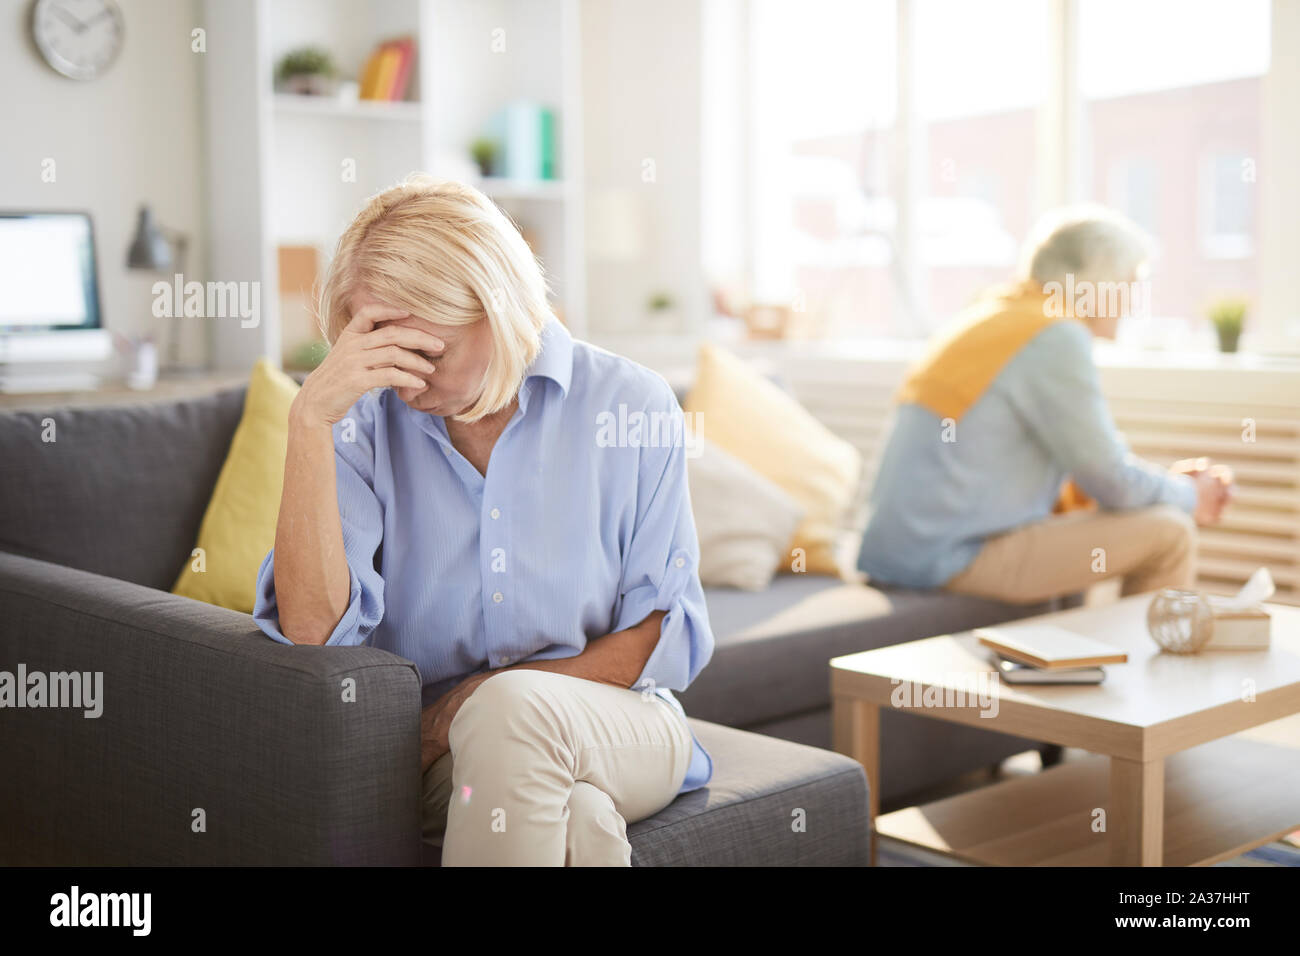 Portrait of senior couple fighting sitting on opposite sides of sofa at home, focus on frustrated wife in foreground, copy space Stock Photo